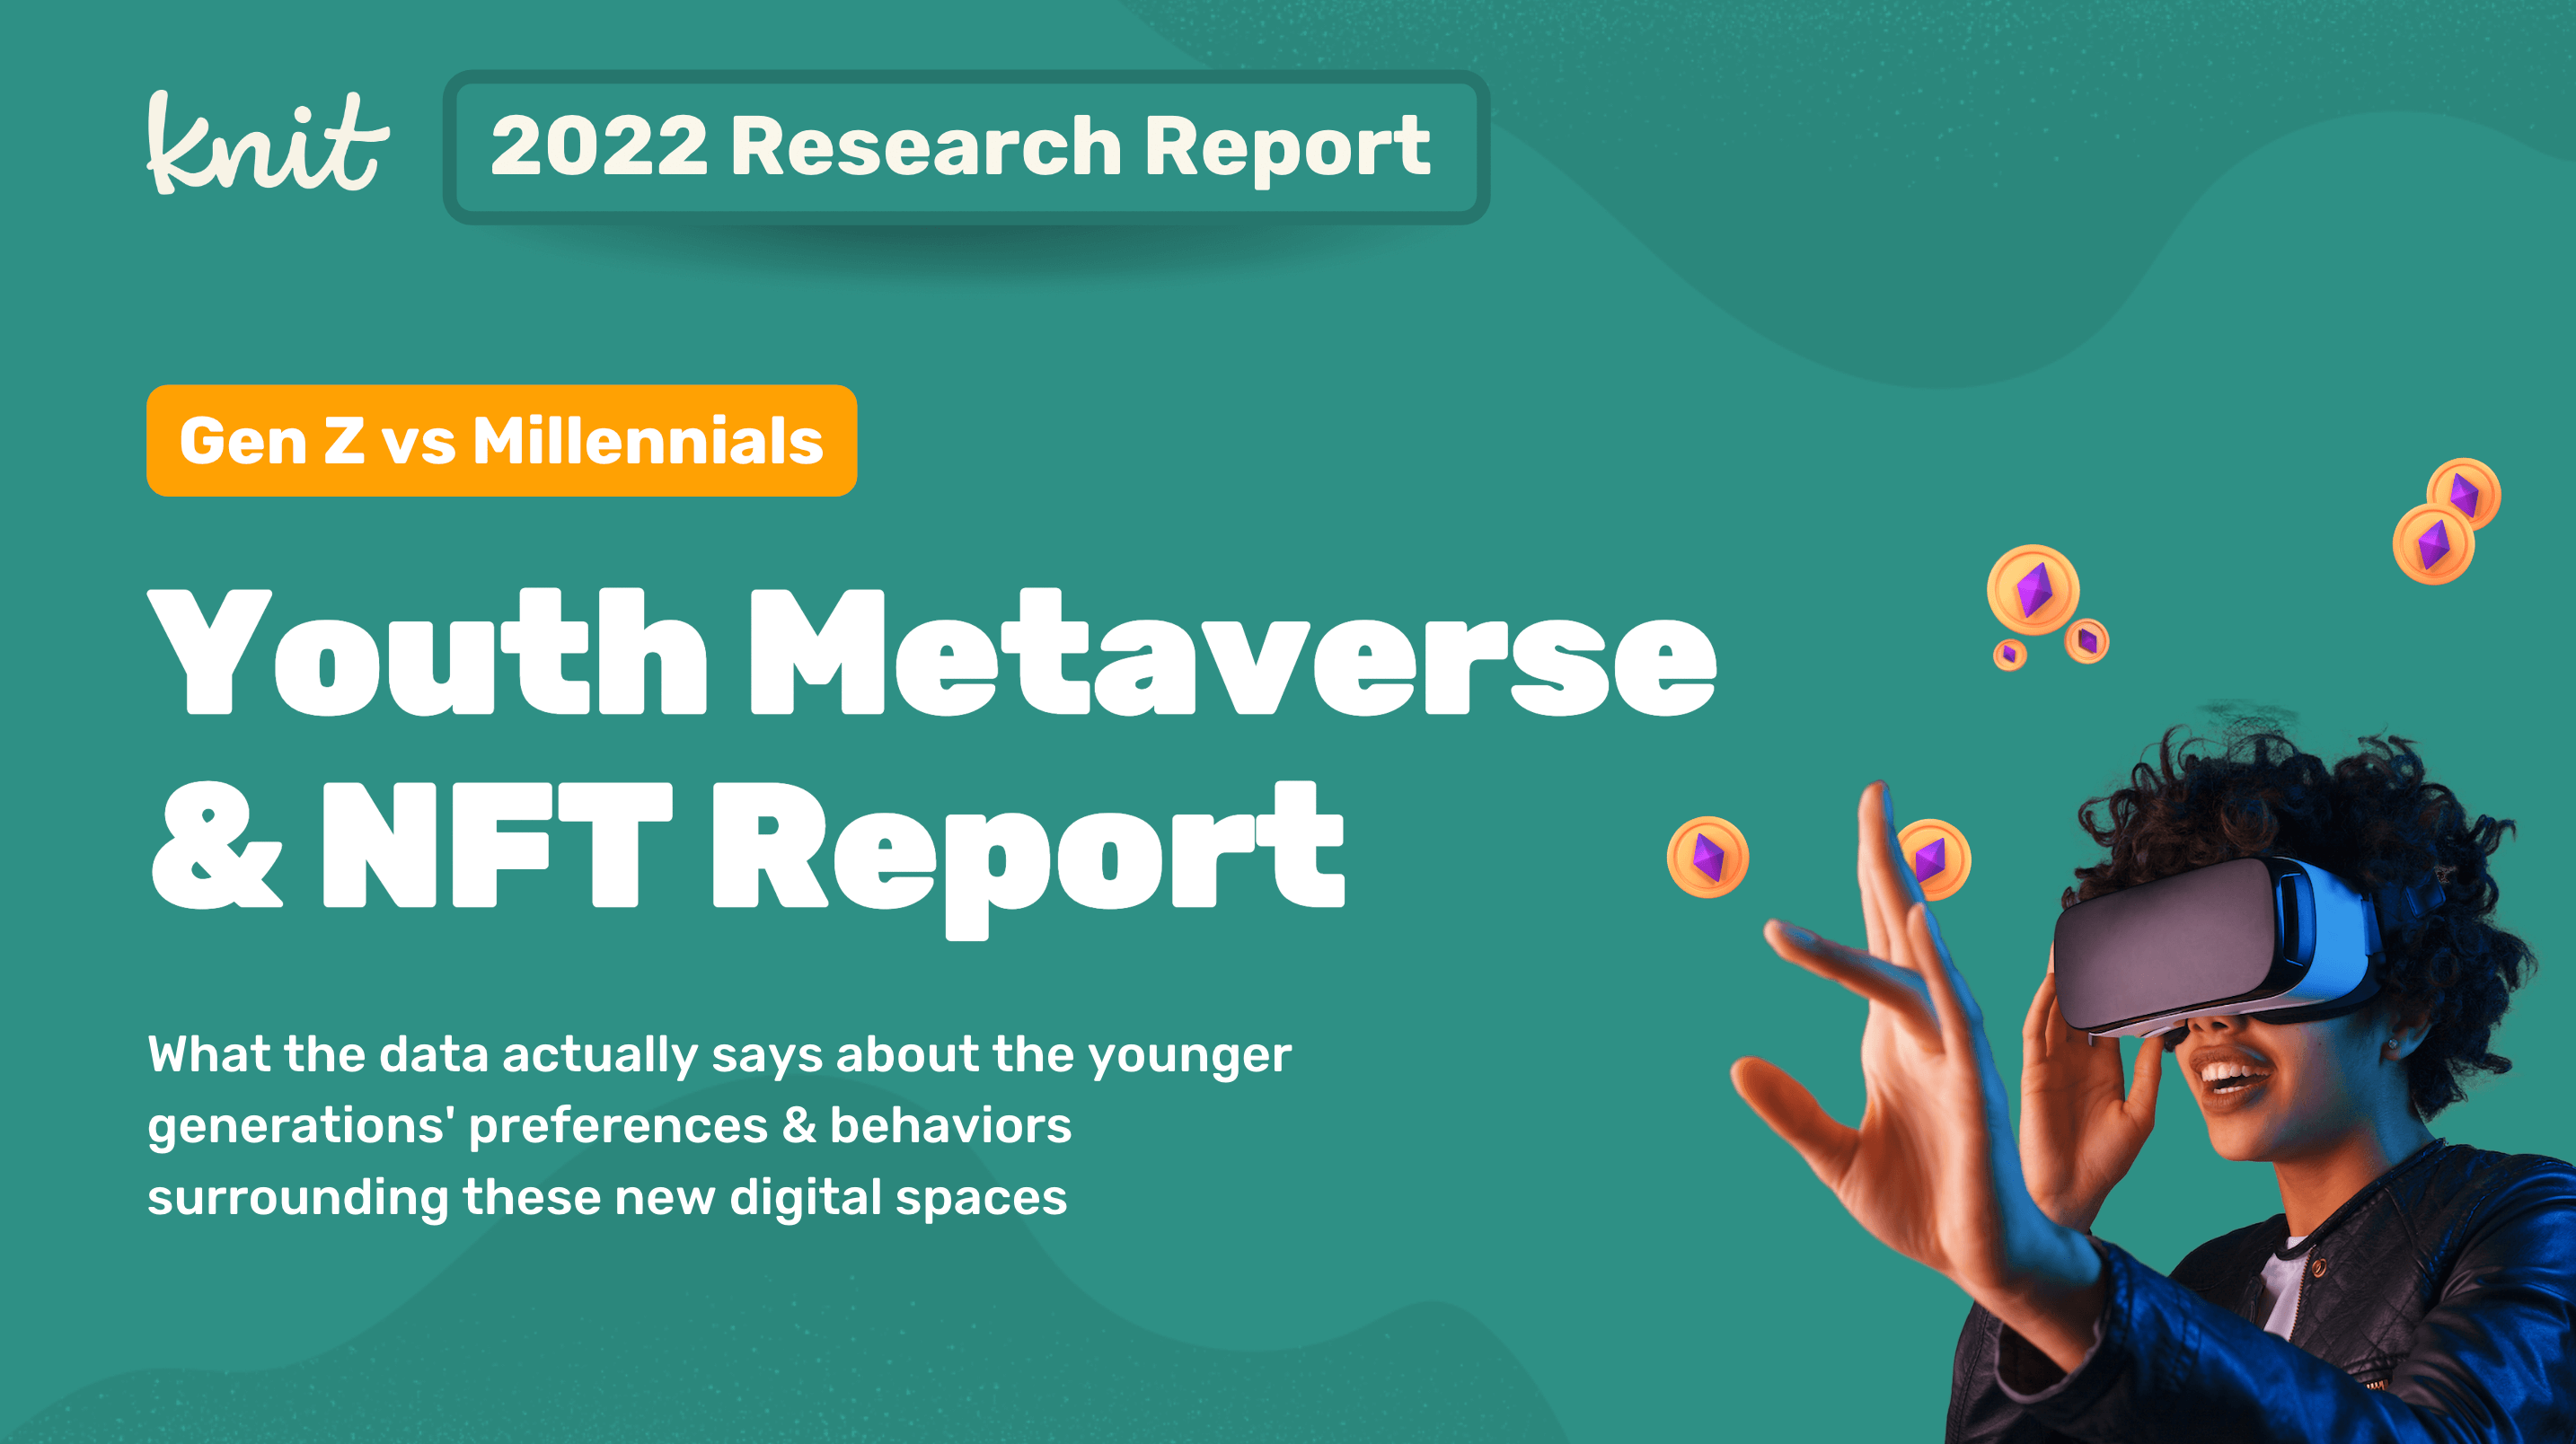 Knit Youth Metaverse Report Cover AI-powered Research